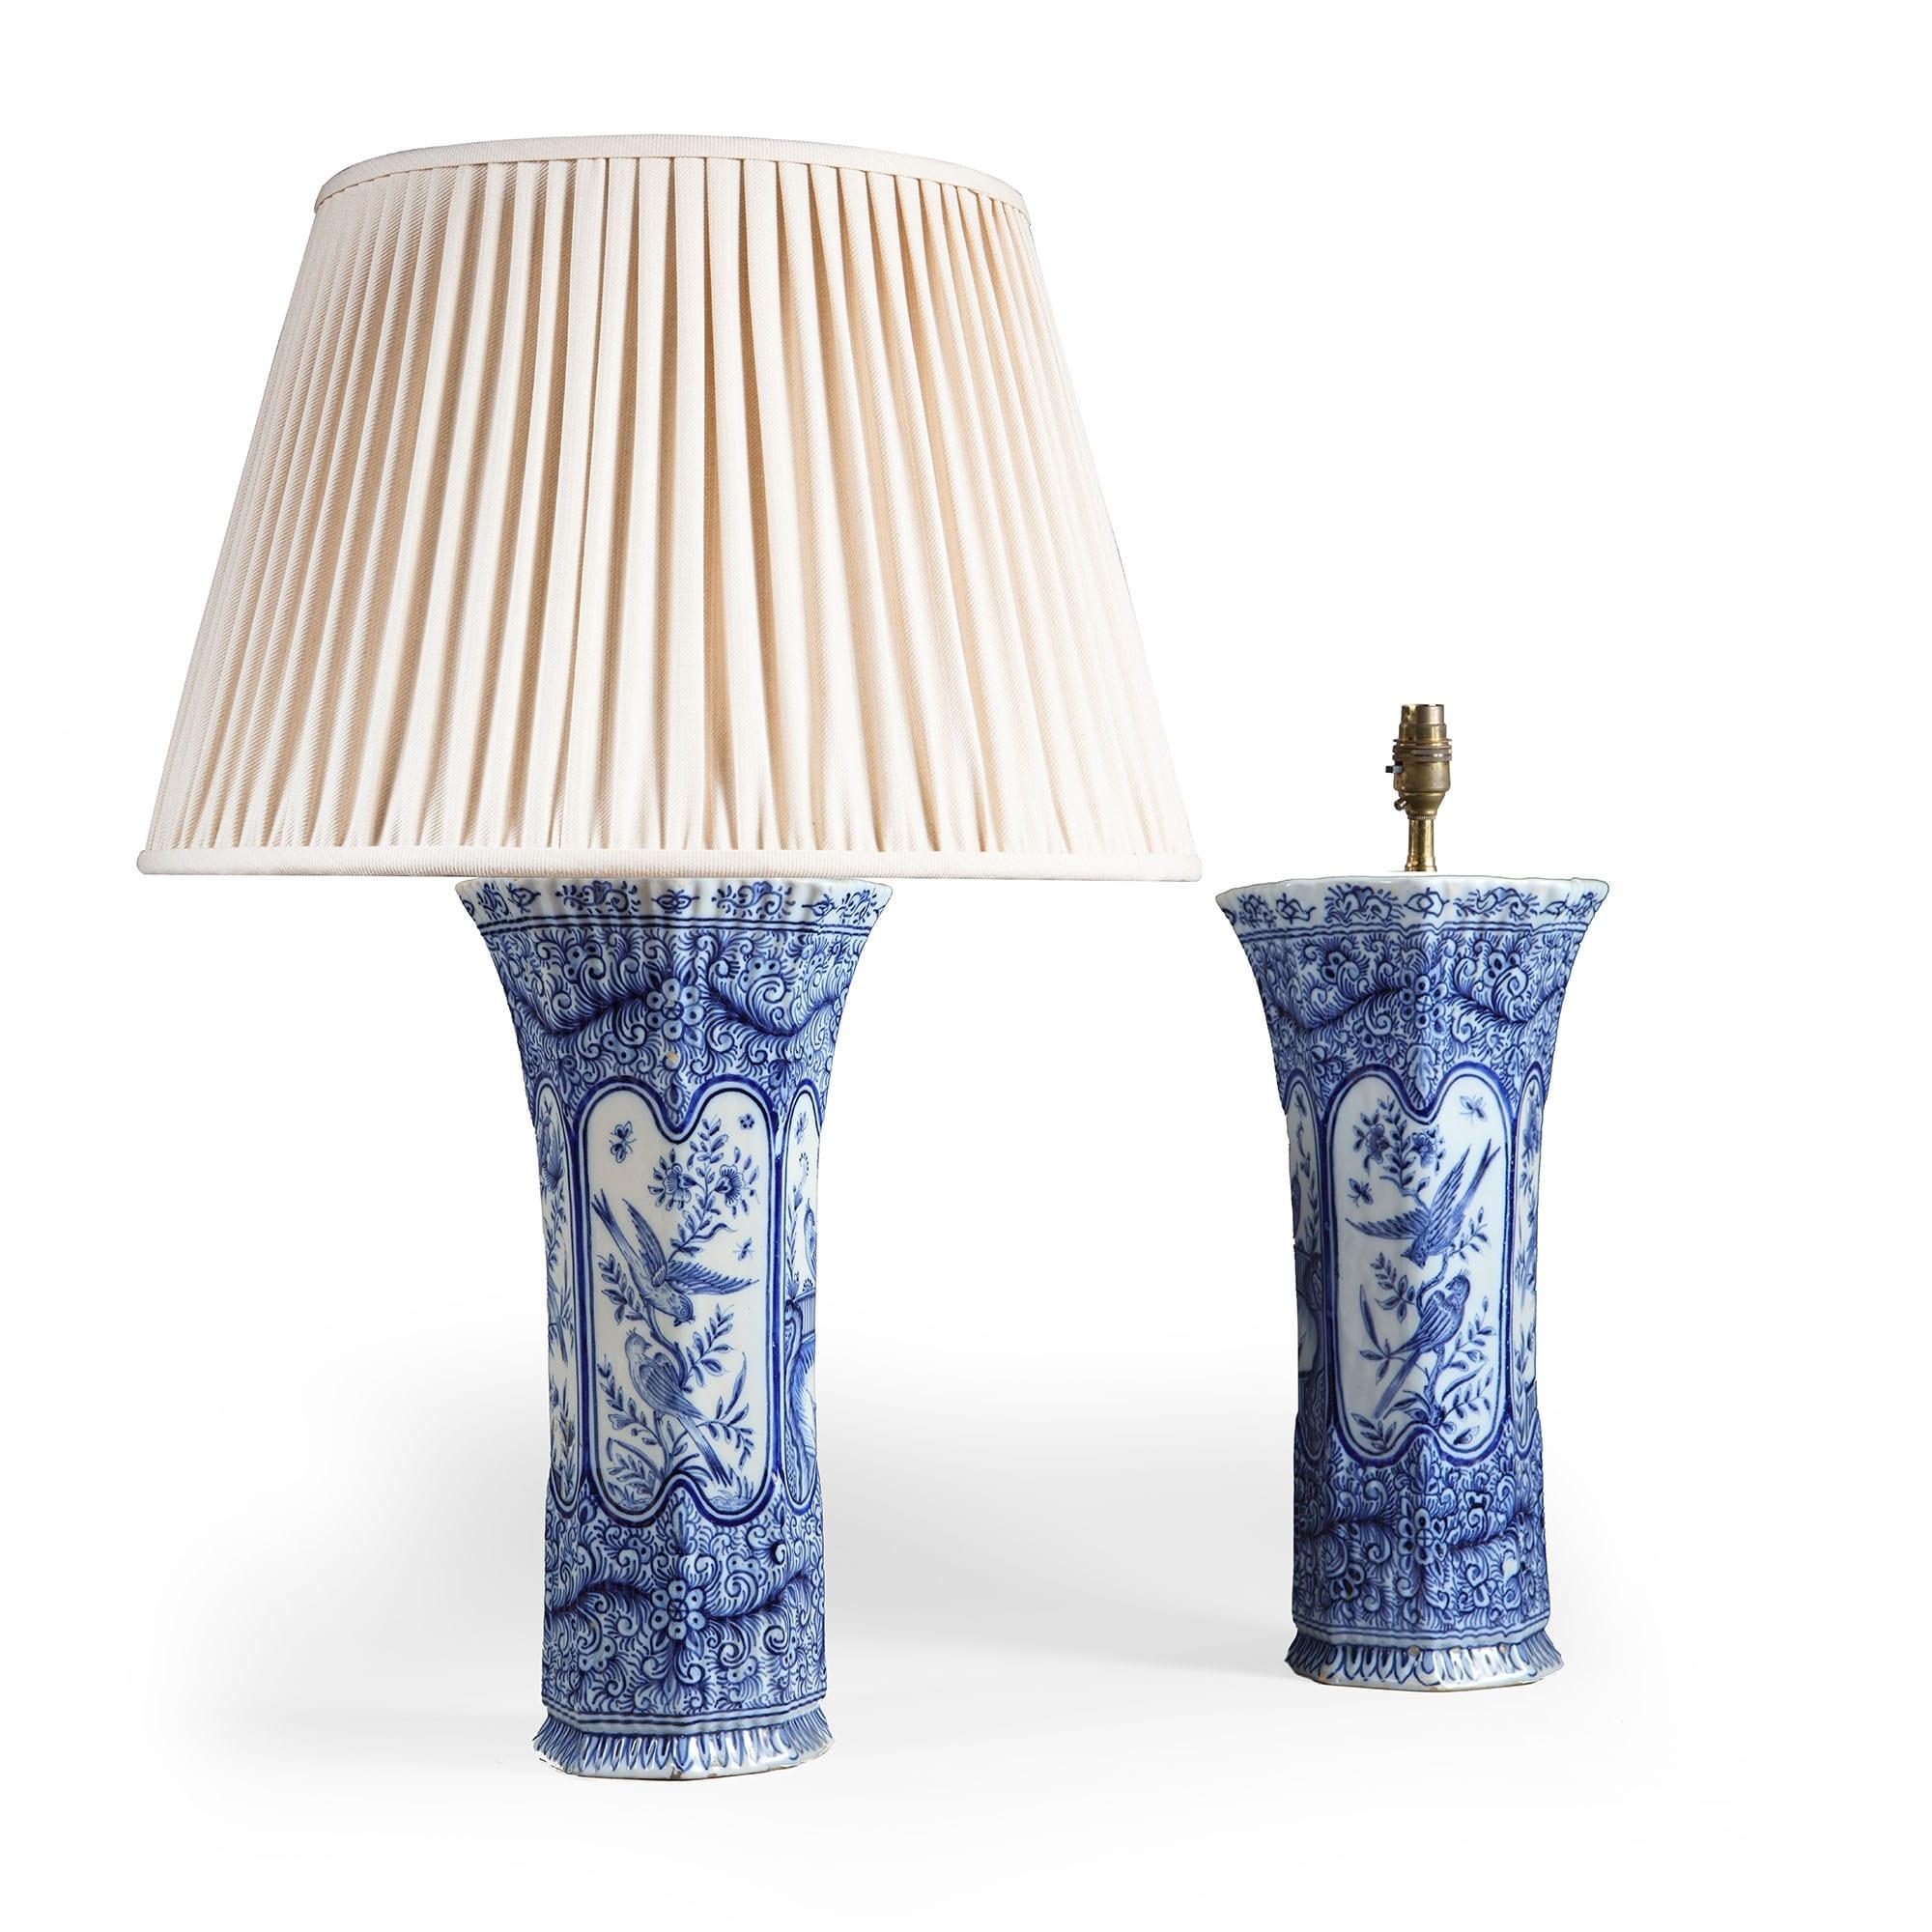 Rococo Pair of Delft Blue and White Trumpet Vases Mounted as Table Lamps